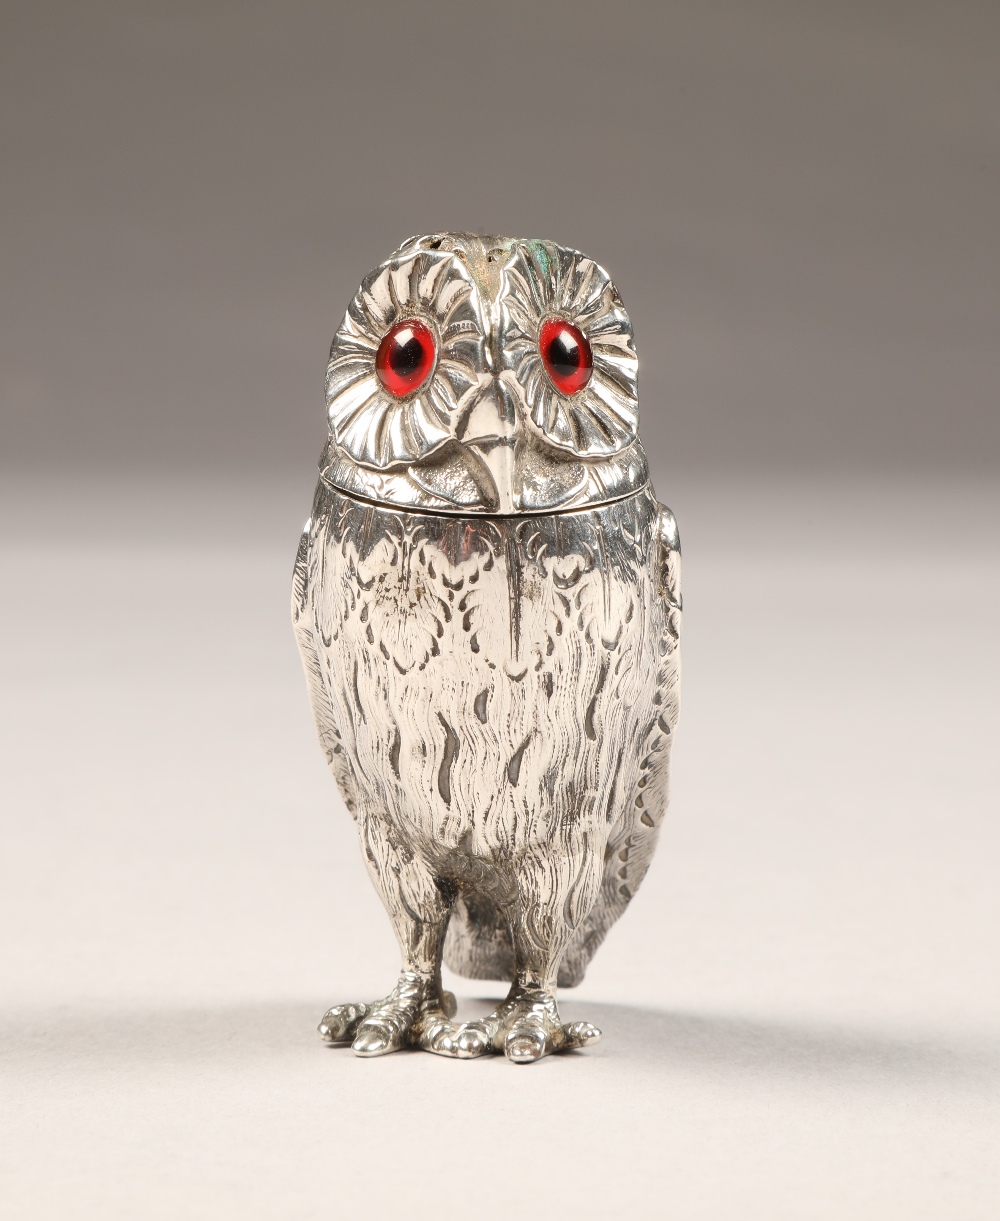 Victorian silver Owl novelty pepper pot, assay marked London 1849 possibly George Burrows II, length